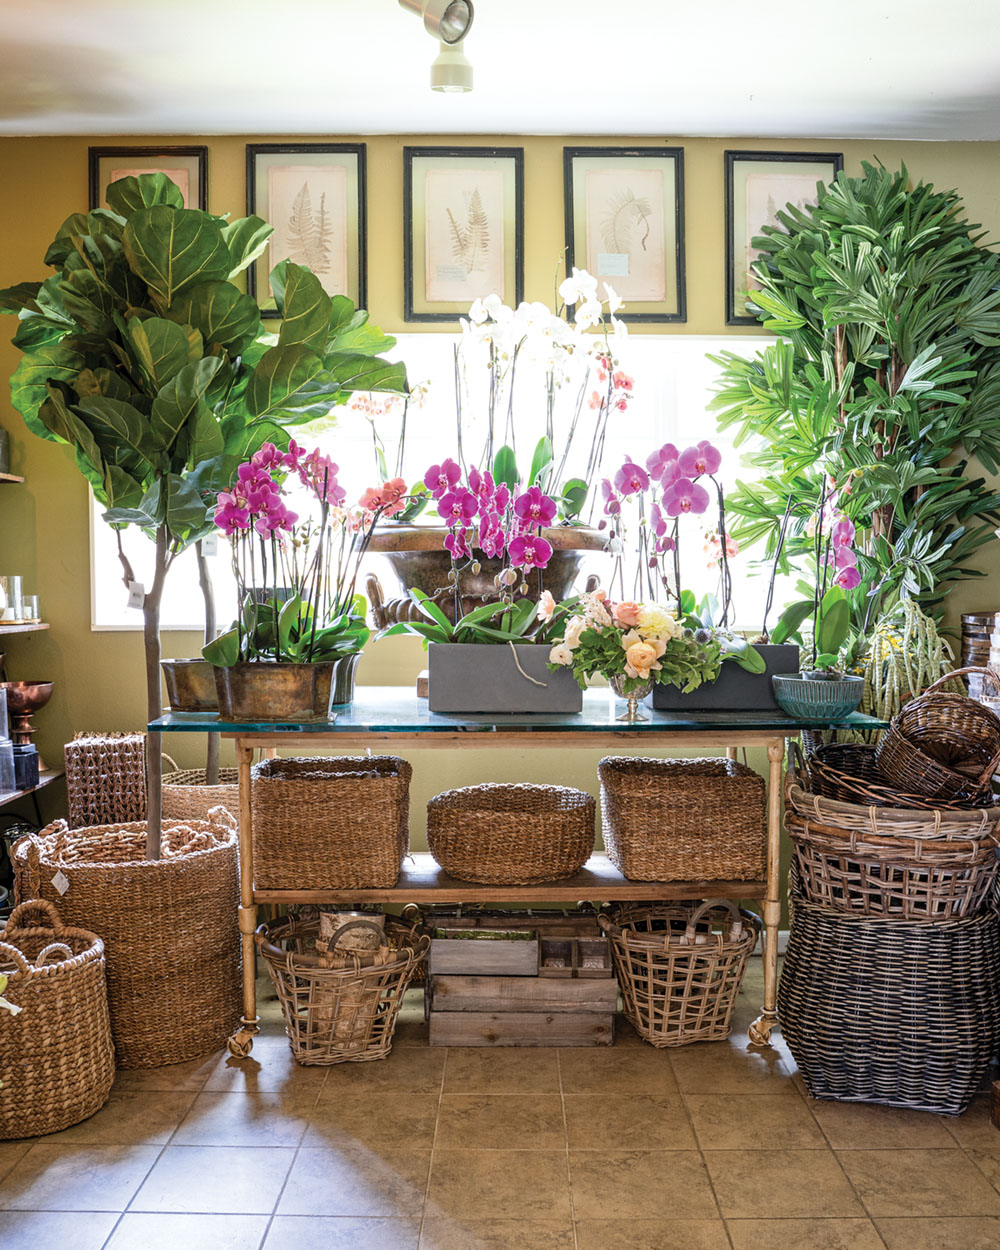 Santa Barbara shopping: potted orchids, potted trees, and baskets of all shapes, styles, and sizes at Hogue & Co. flower shop